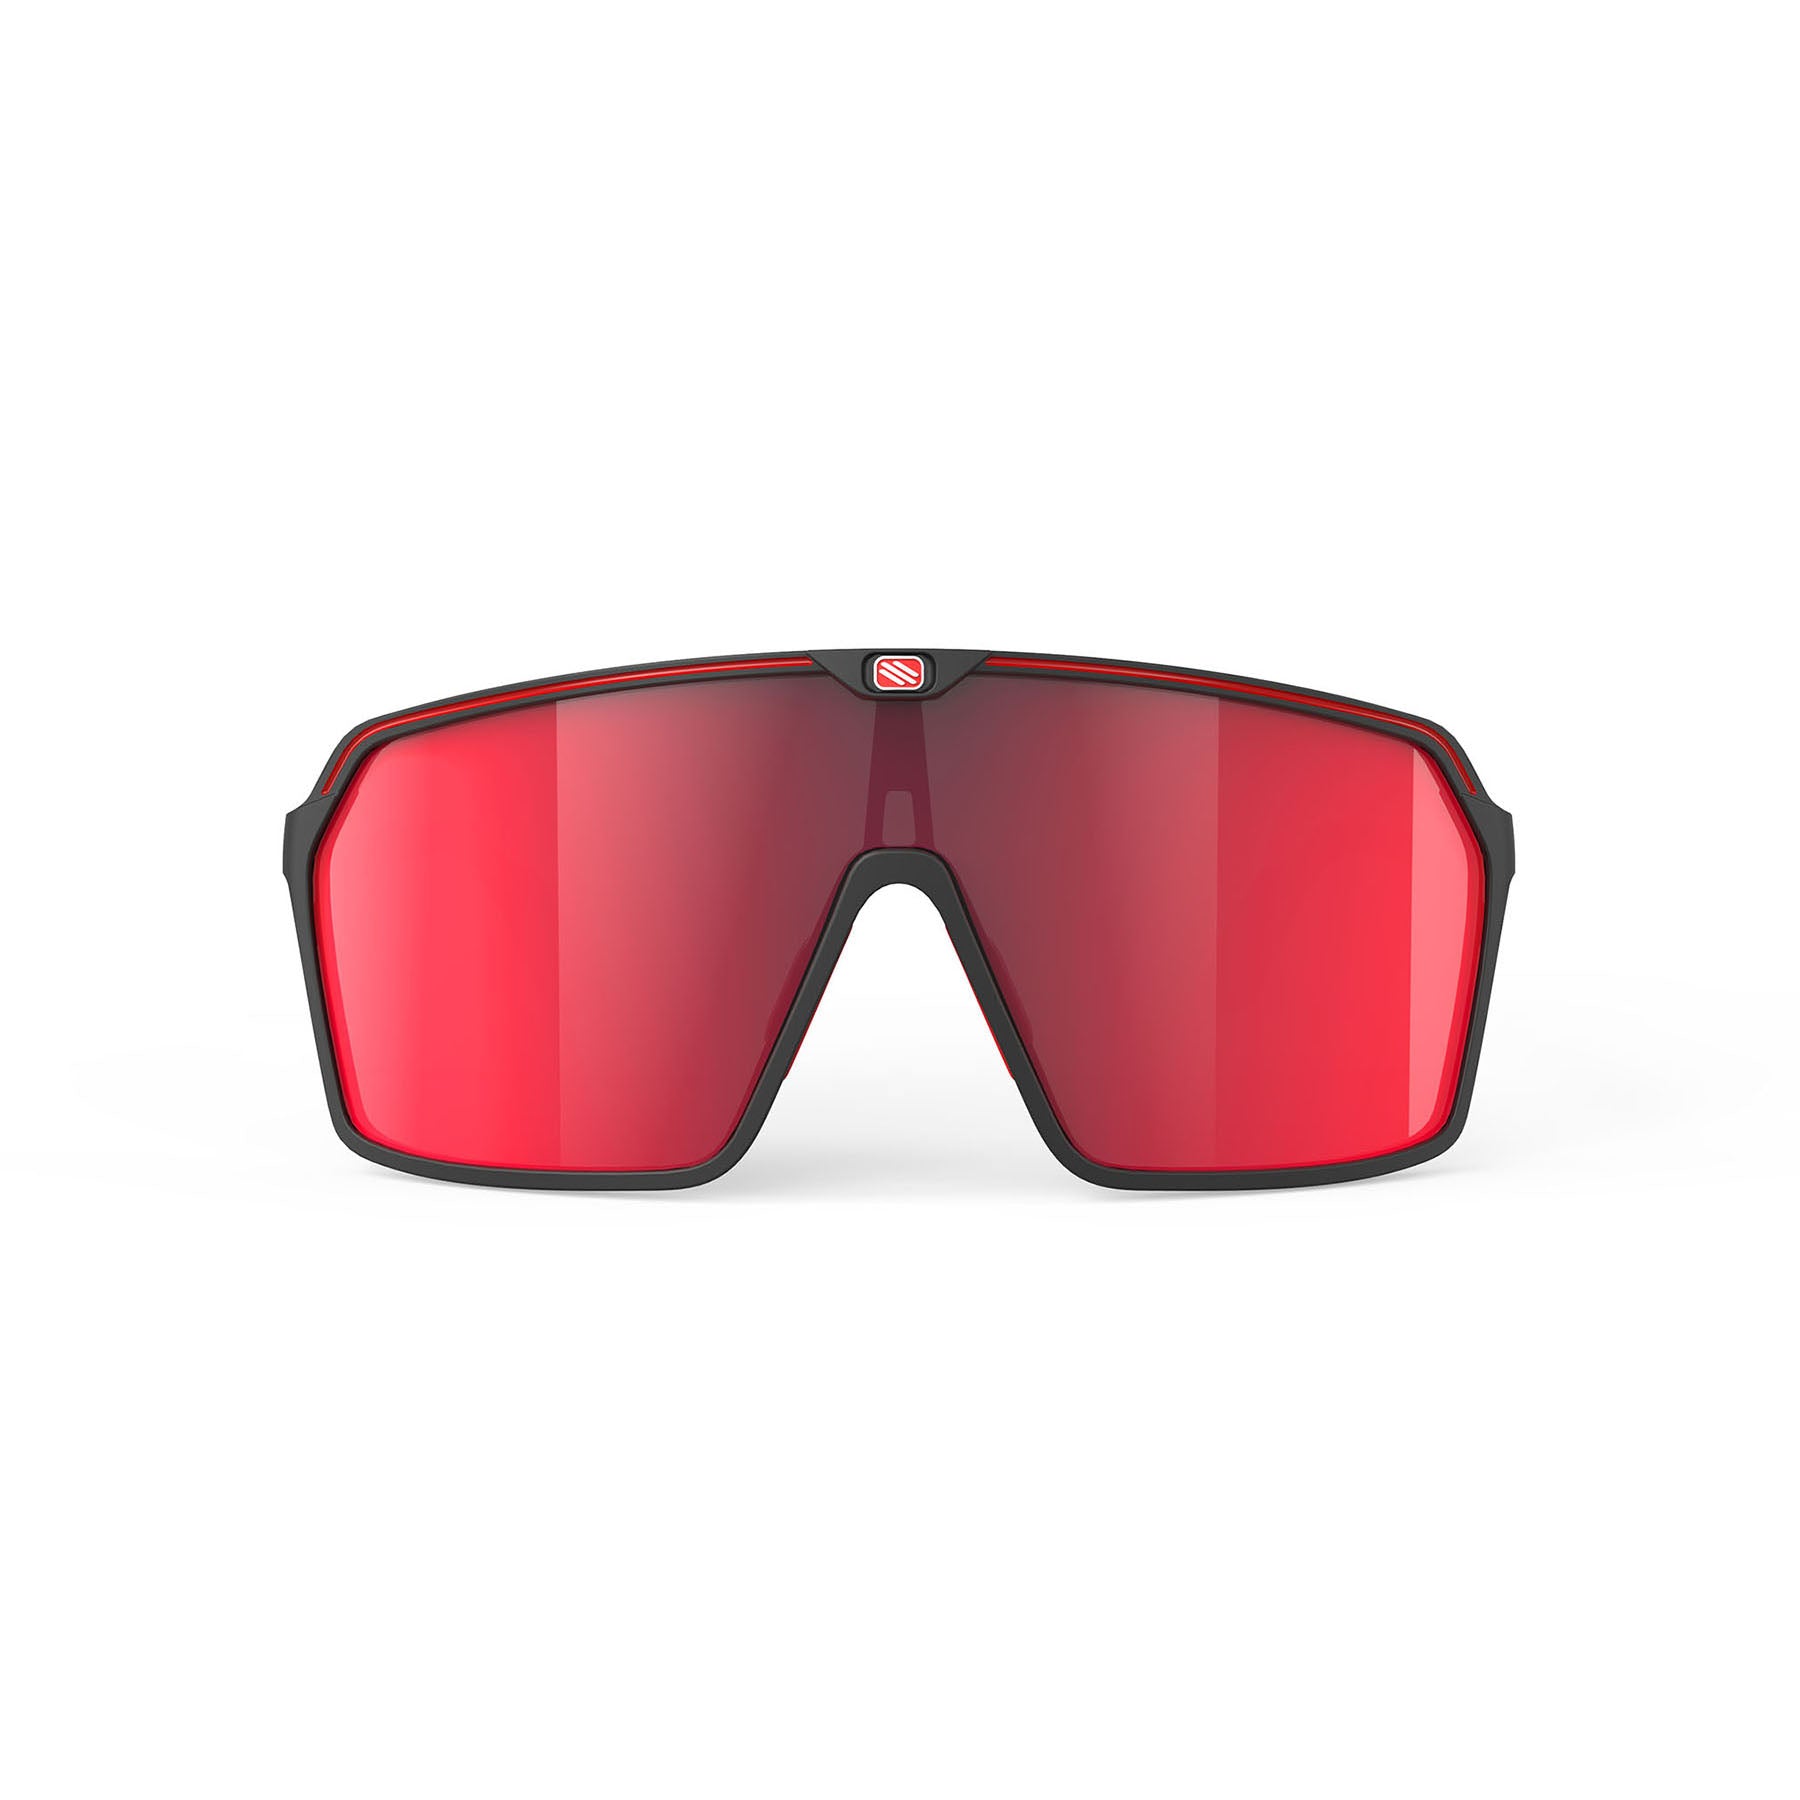 Spinshield | Active Lifestyle Sunglasses – Rudy Project North